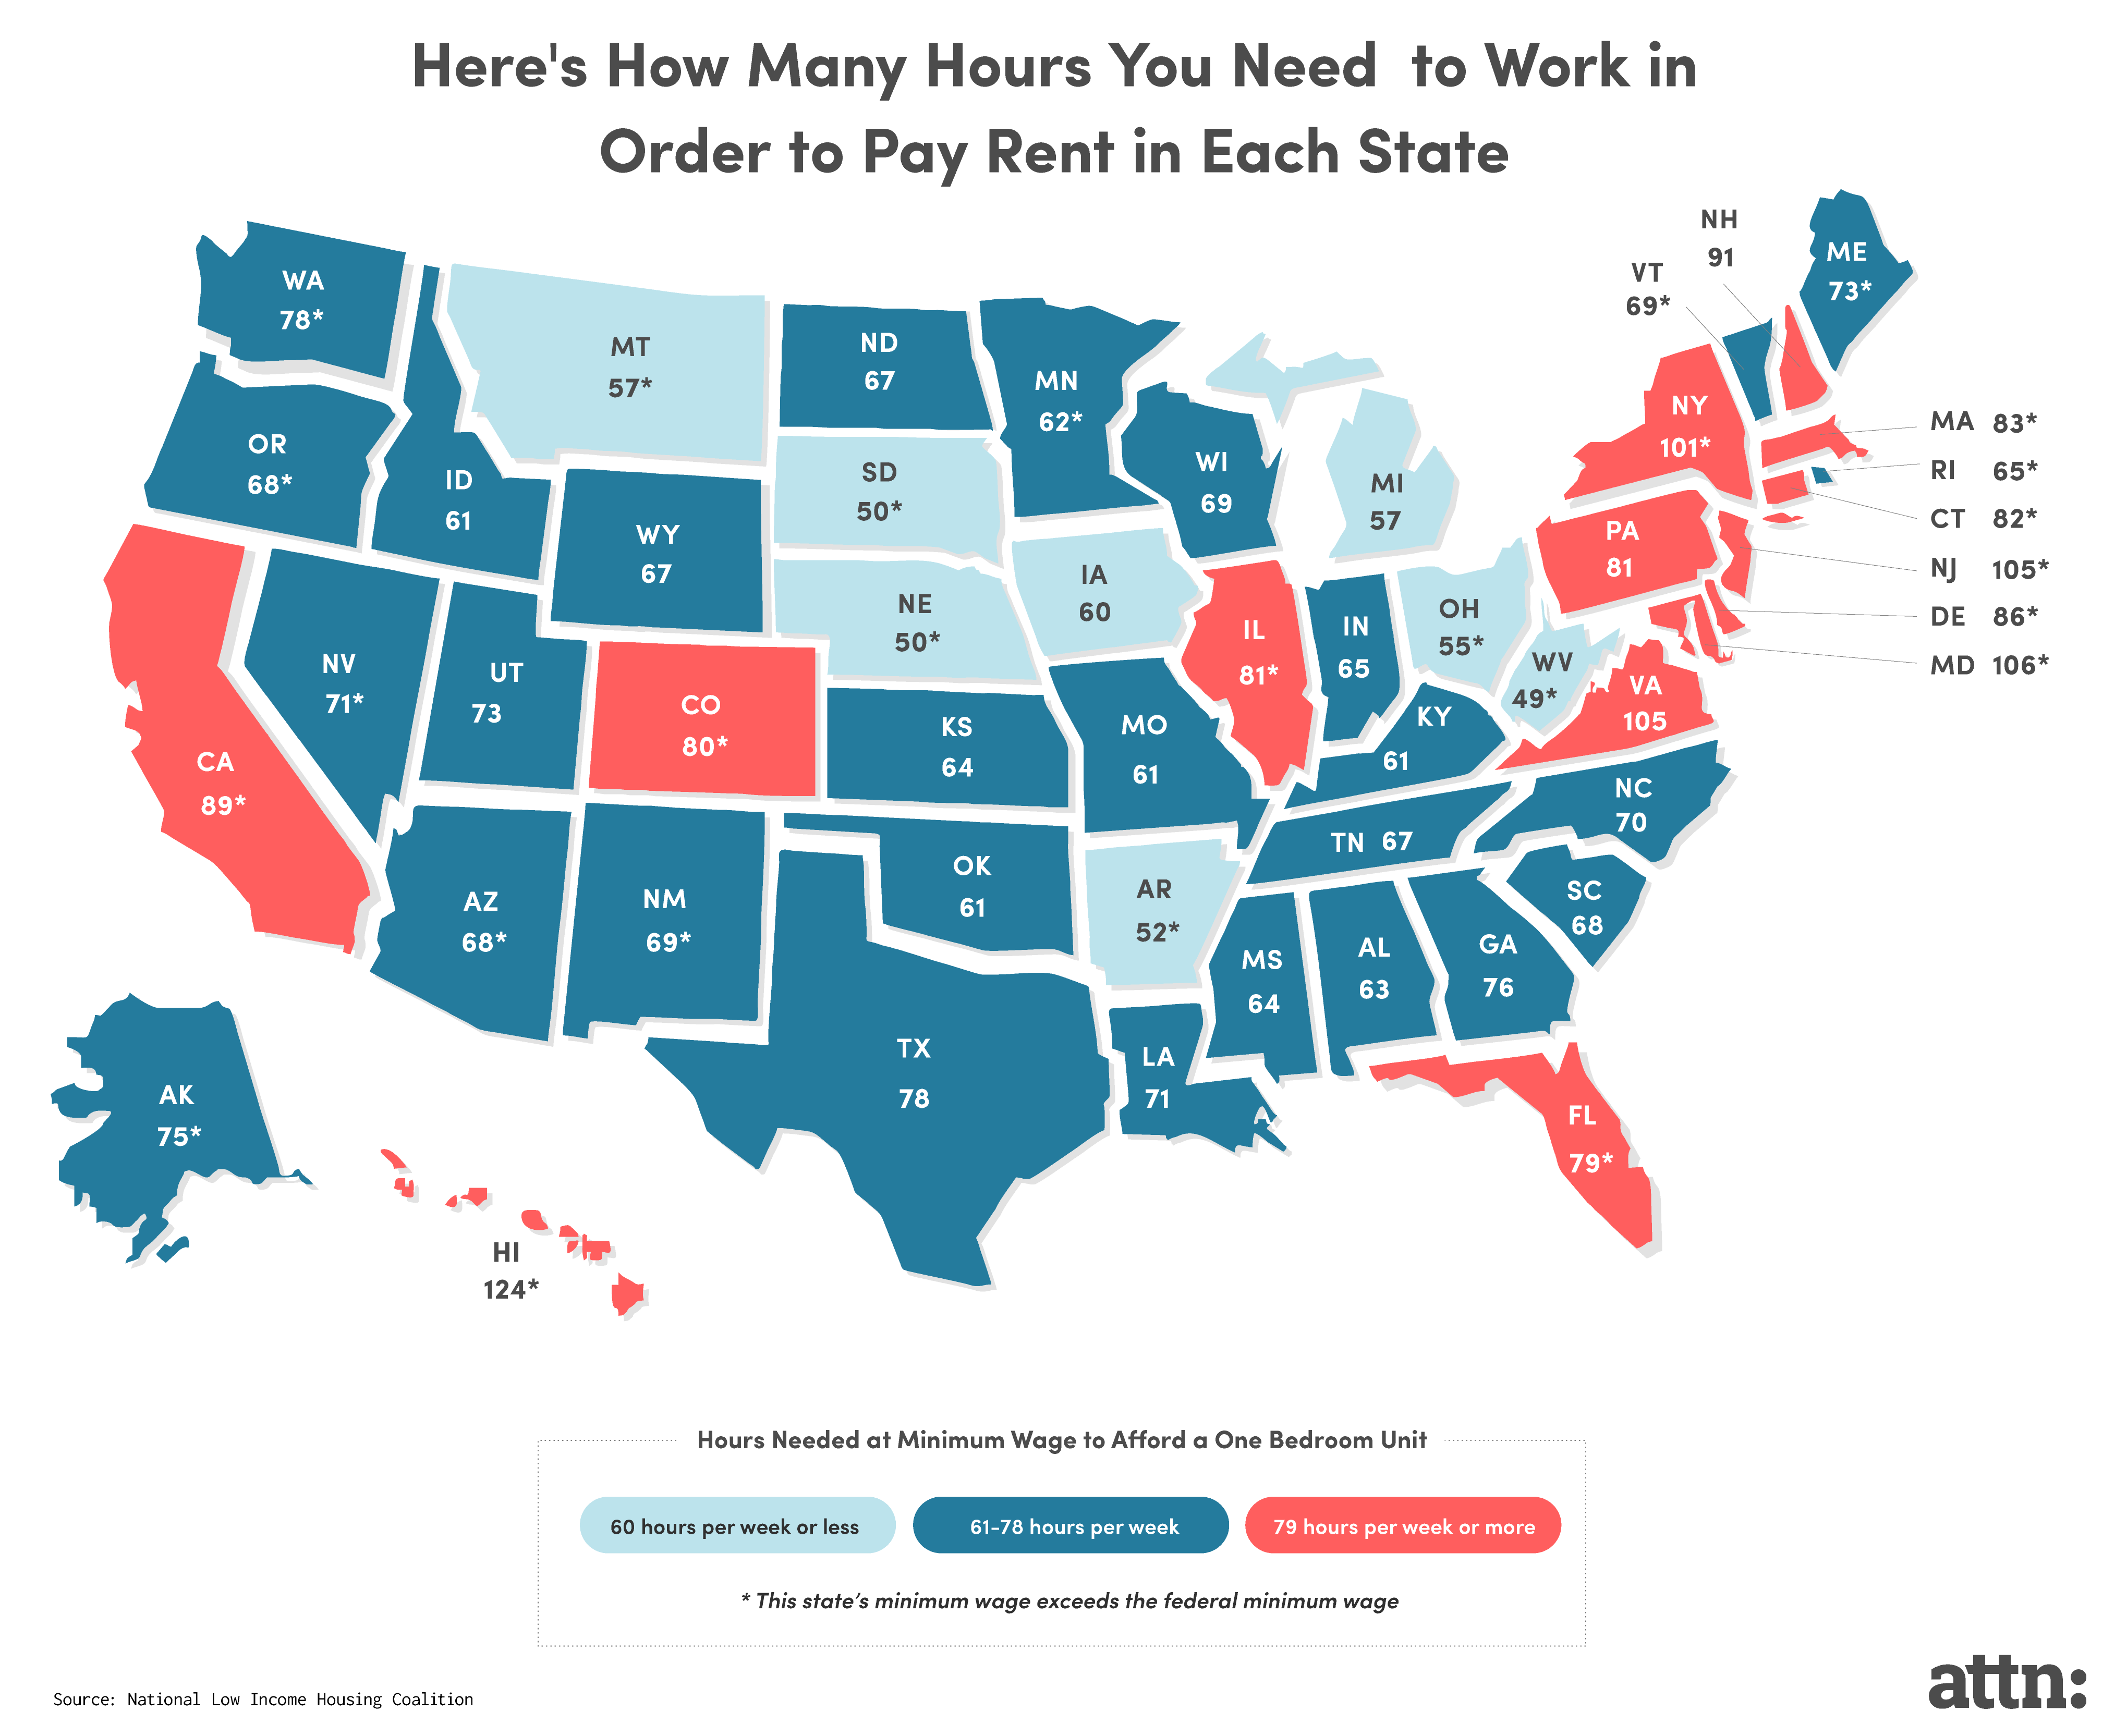 Hours Per Week to Afford Two-Bedroom